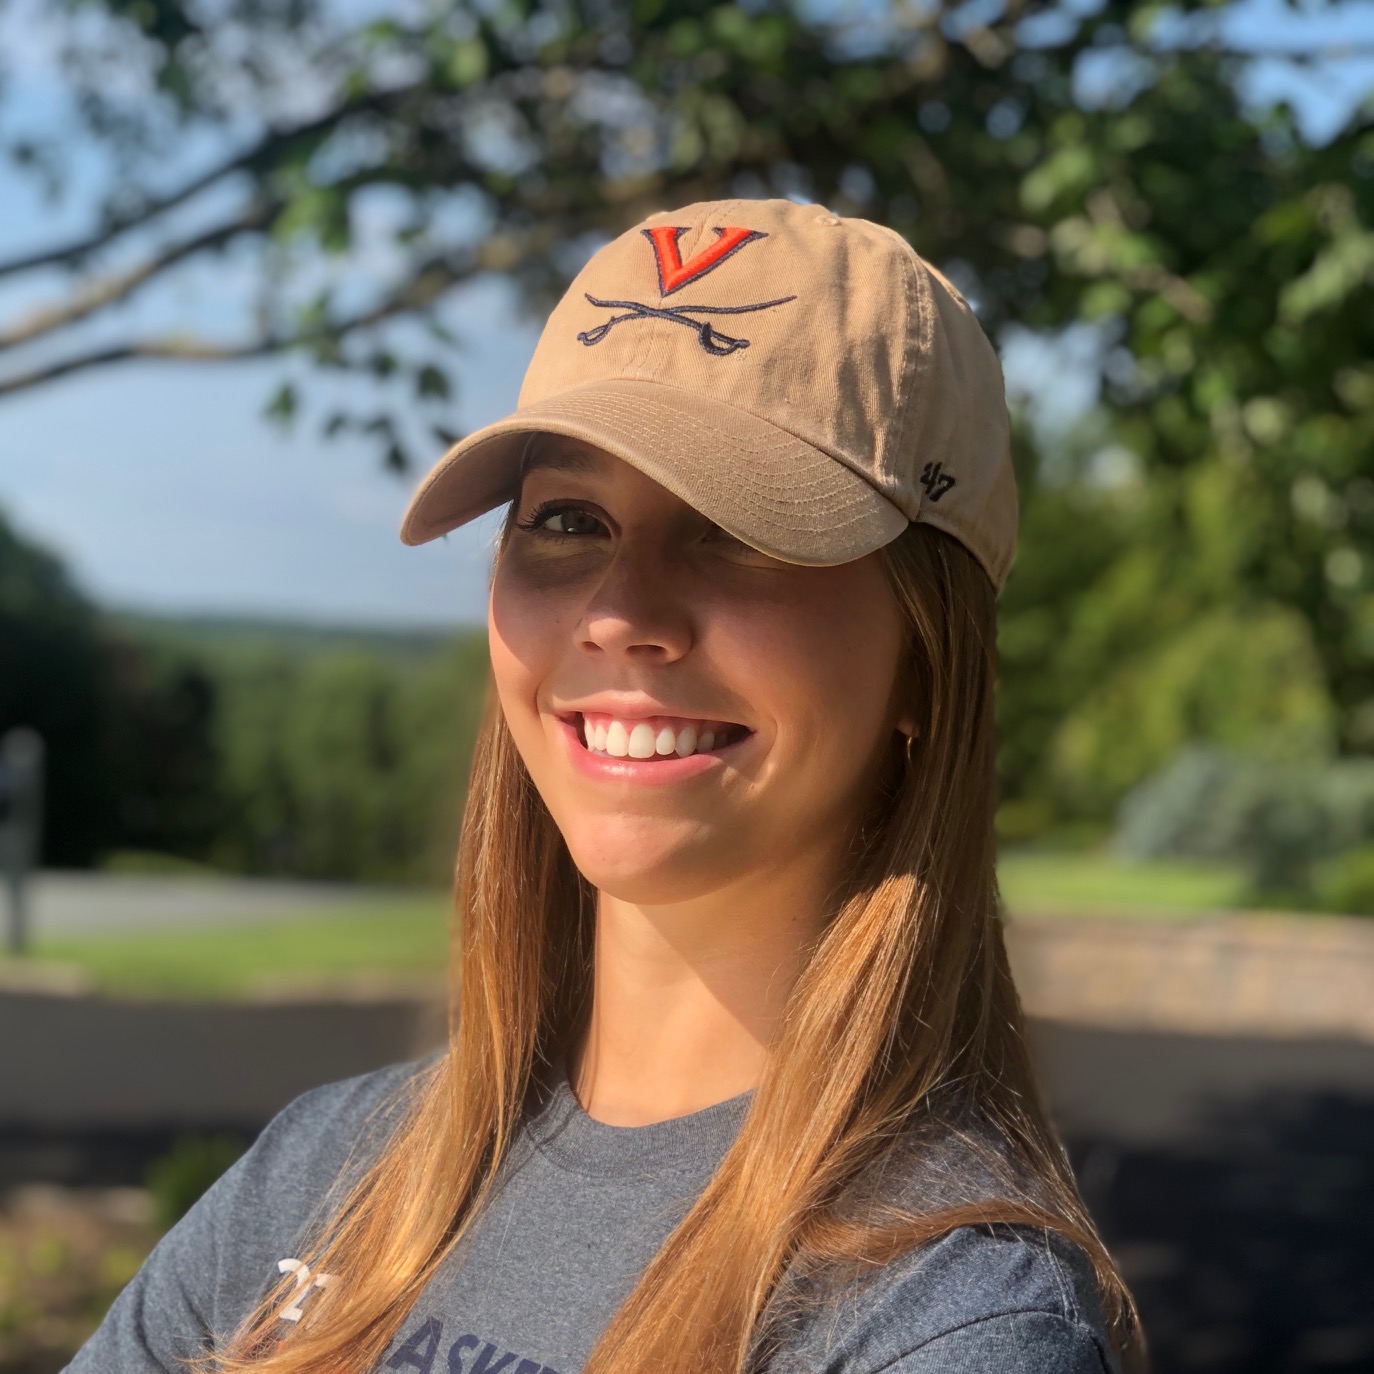 Mincer's on X: Our '47 Brand adjustable hat looks great in khaki and is  sandwashed for a broken-in feel  #UVA #HOOS #WAHOOWA   / X